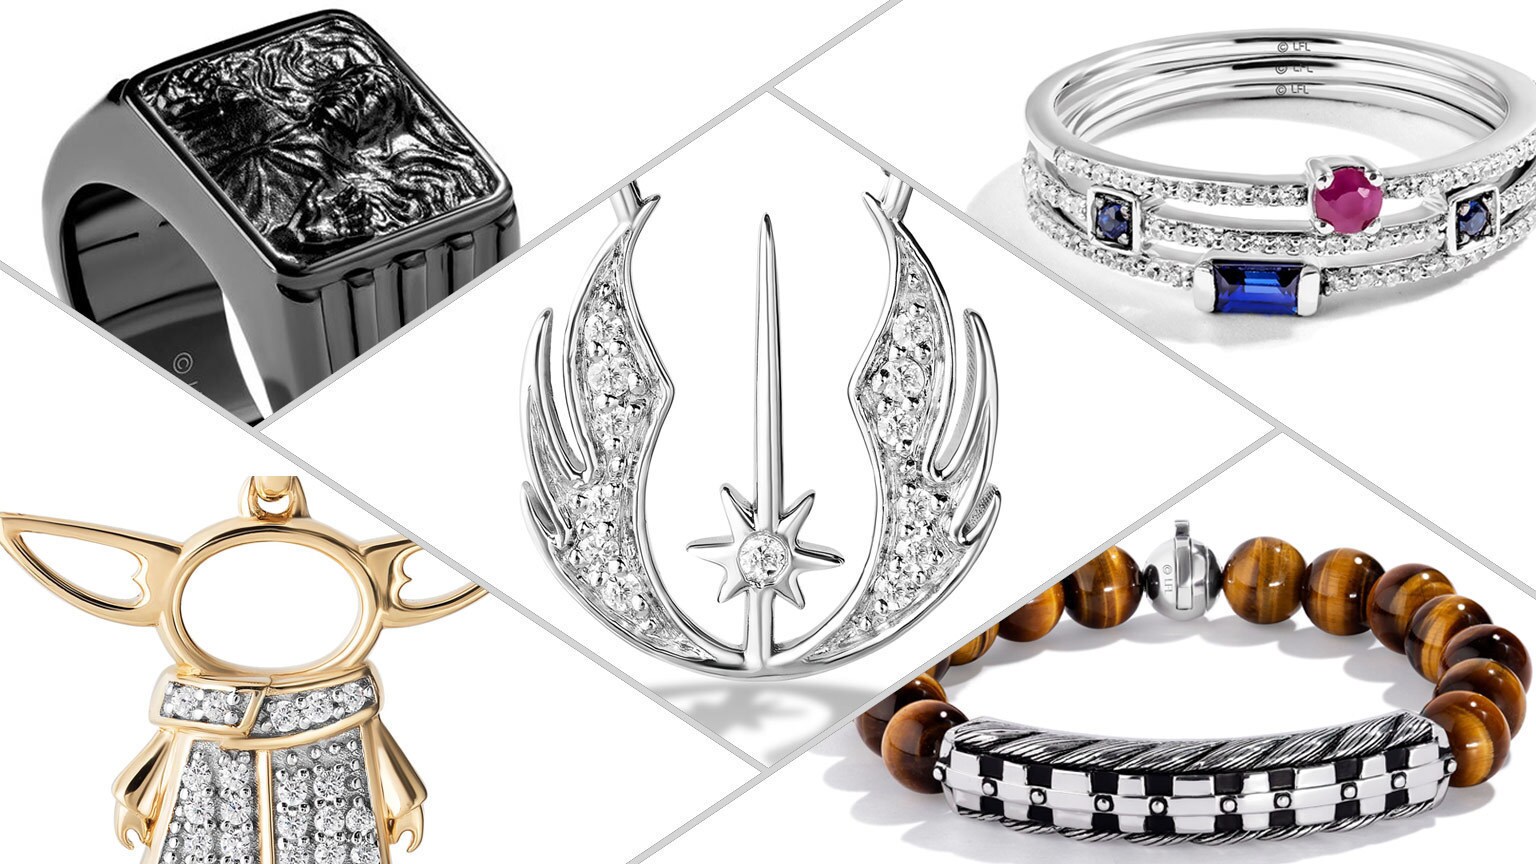 The Force is Strong with Star Wars Fine Jewelry